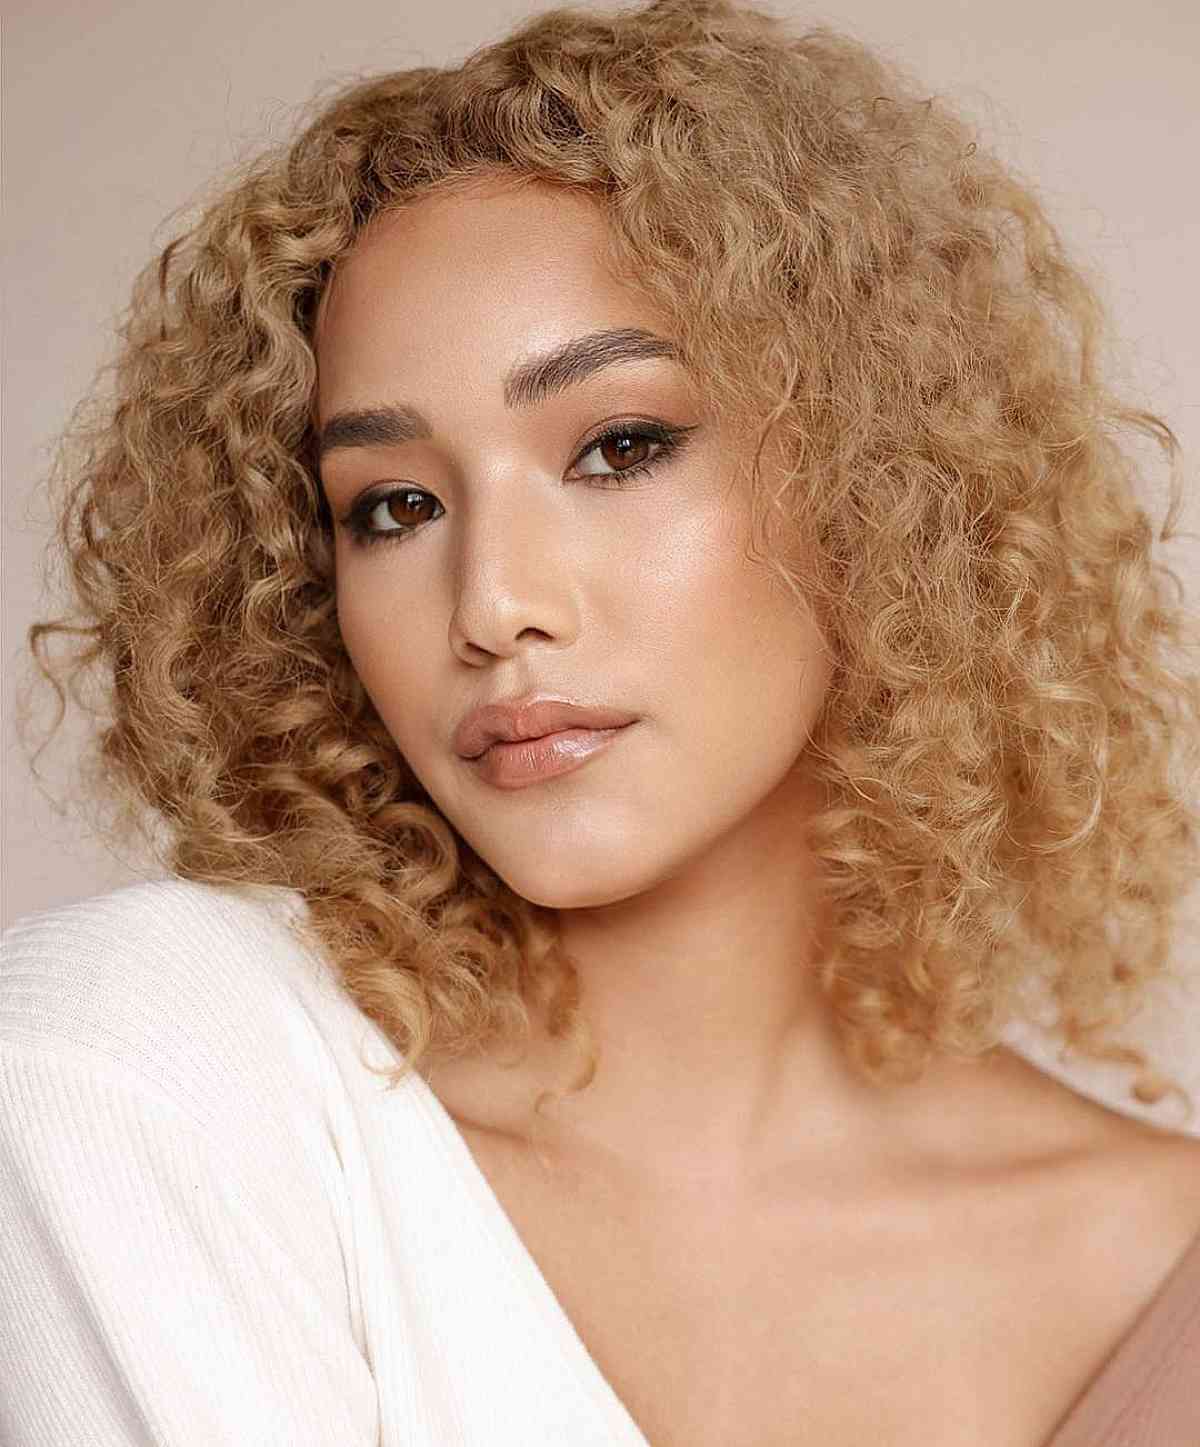 Textured Curly Blonde Hair